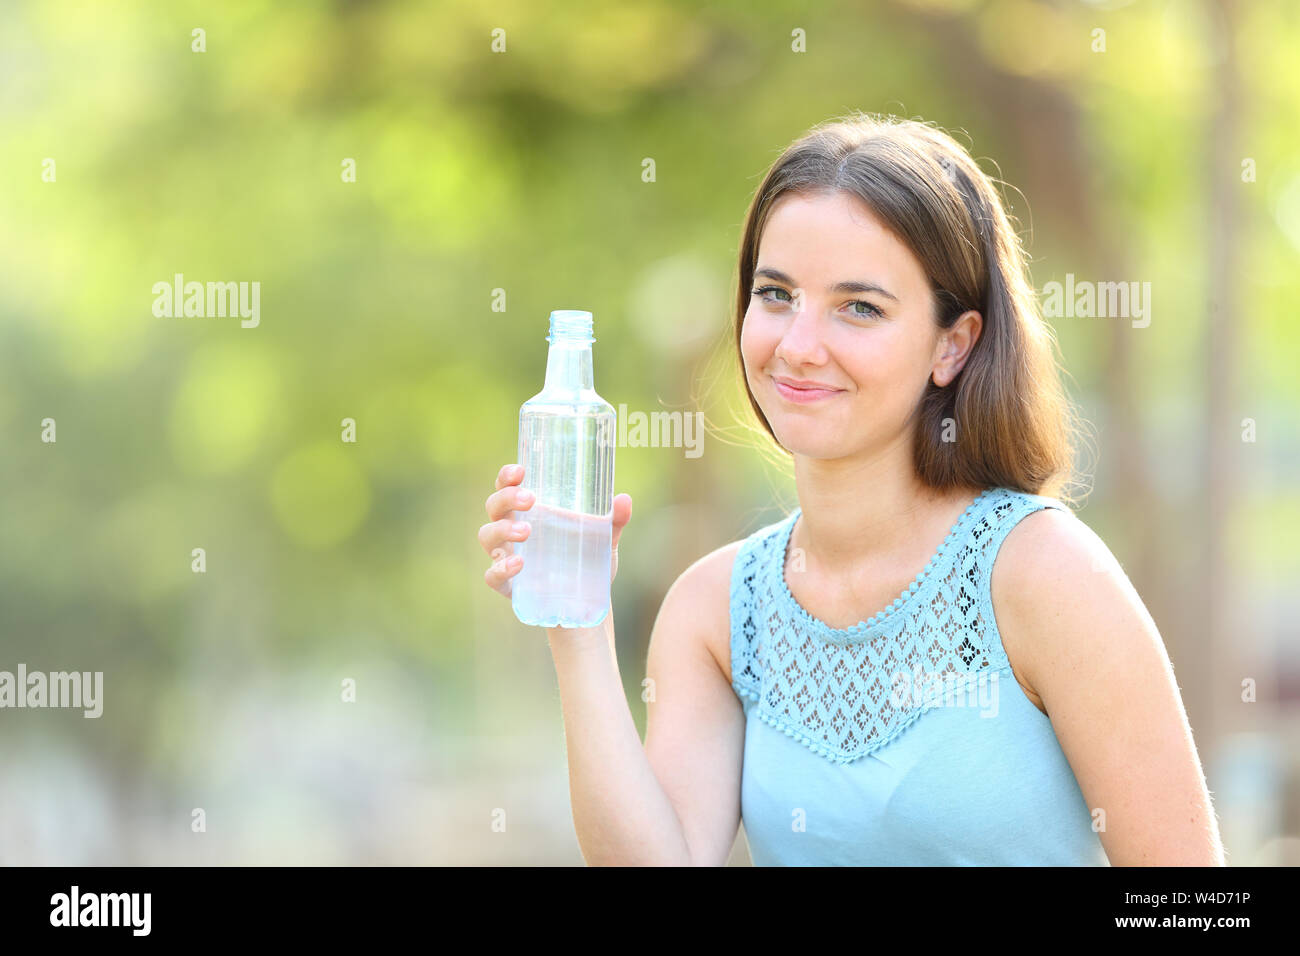 https://c8.alamy.com/comp/W4D71P/smiley-woman-holding-a-bottle-of-water-looking-at-camera-on-green-background-W4D71P.jpg